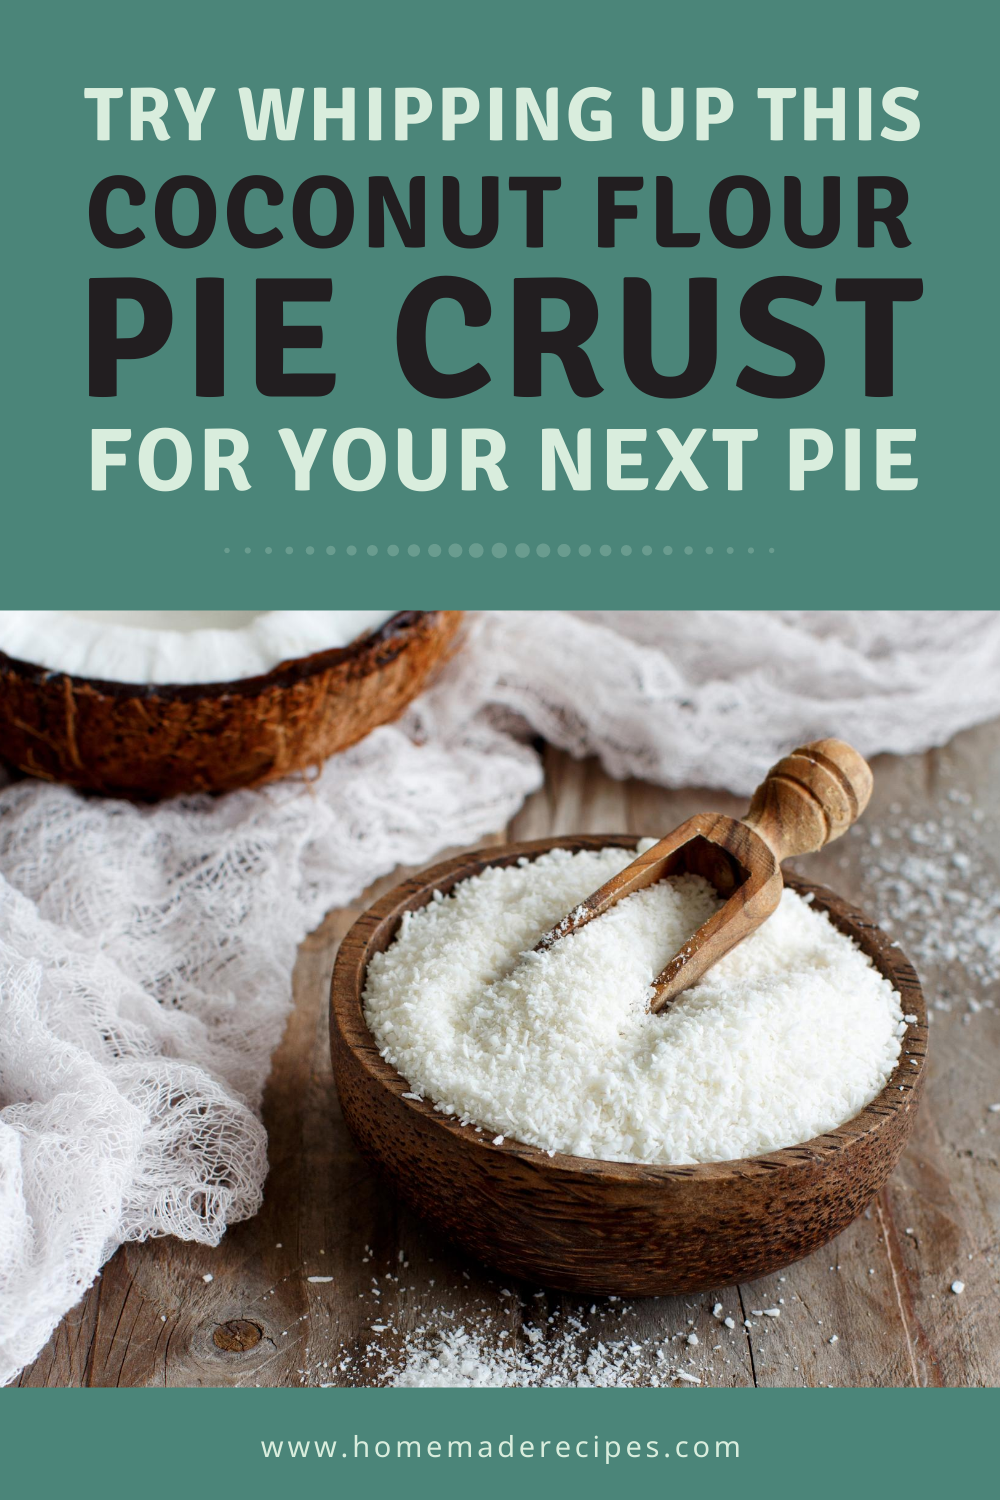 placard | Whip Up This Coconut Flour Pie Crust For Your Next Pie